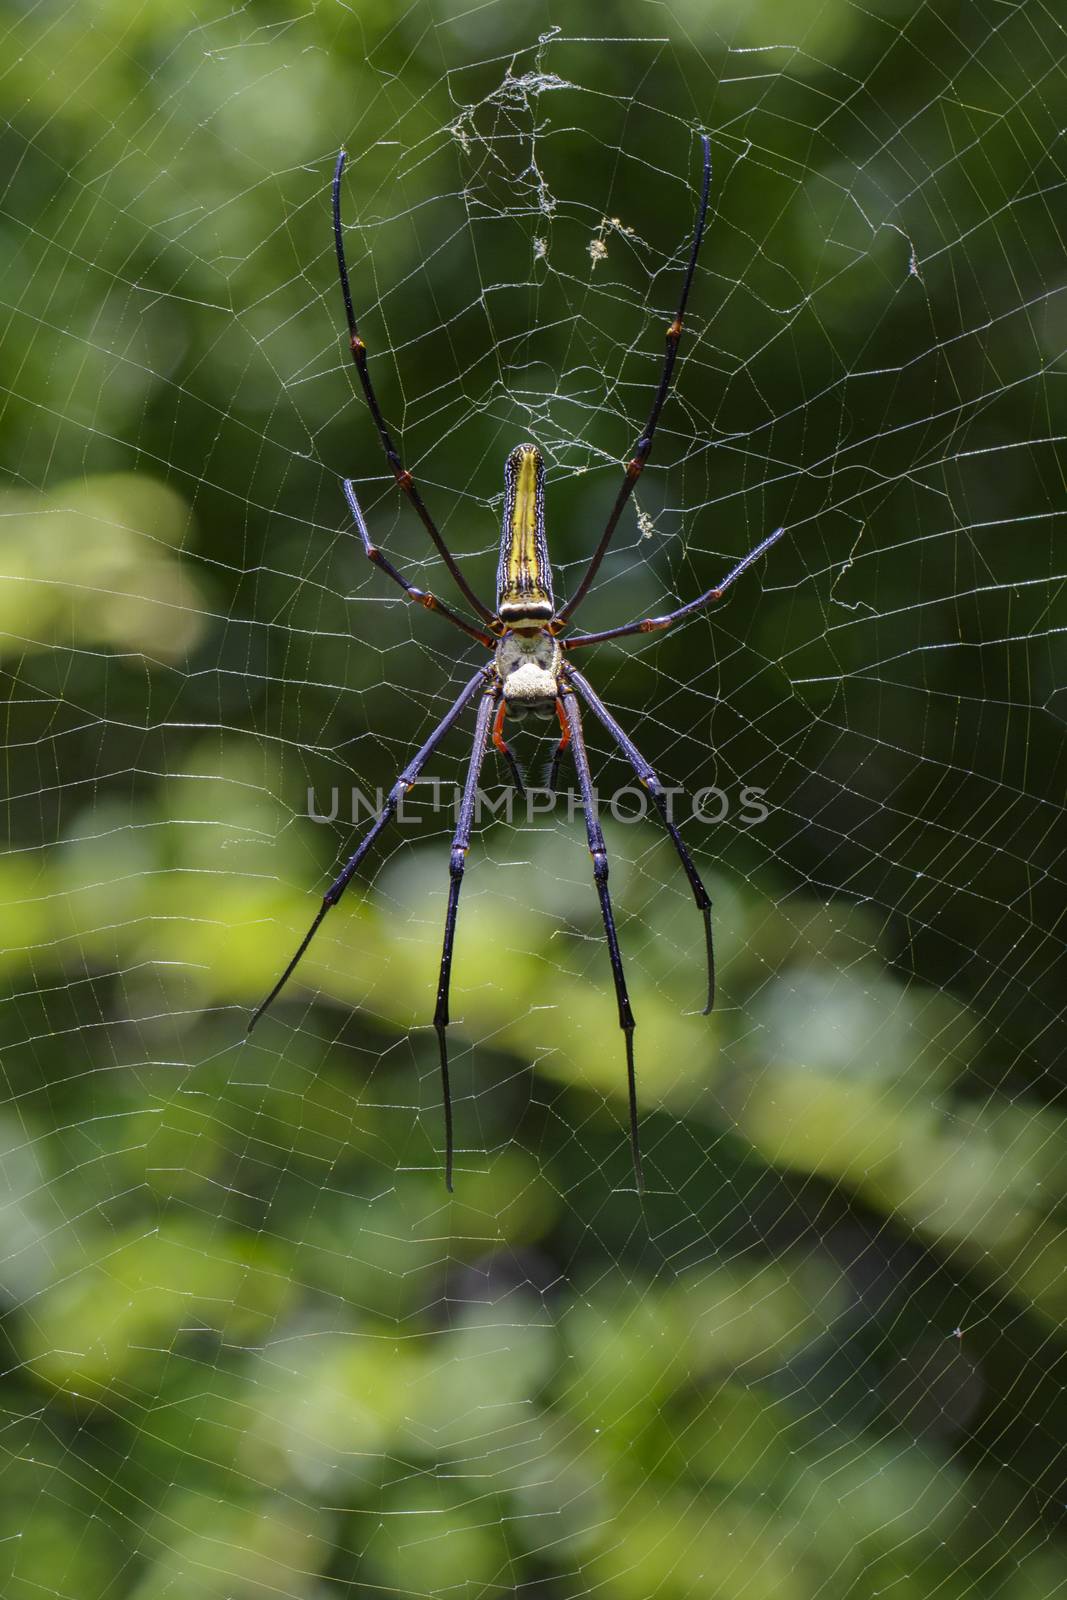 Image of Spider Nephila Maculata, Gaint Long-jawed Orb-weaver in the net. Insect Animal